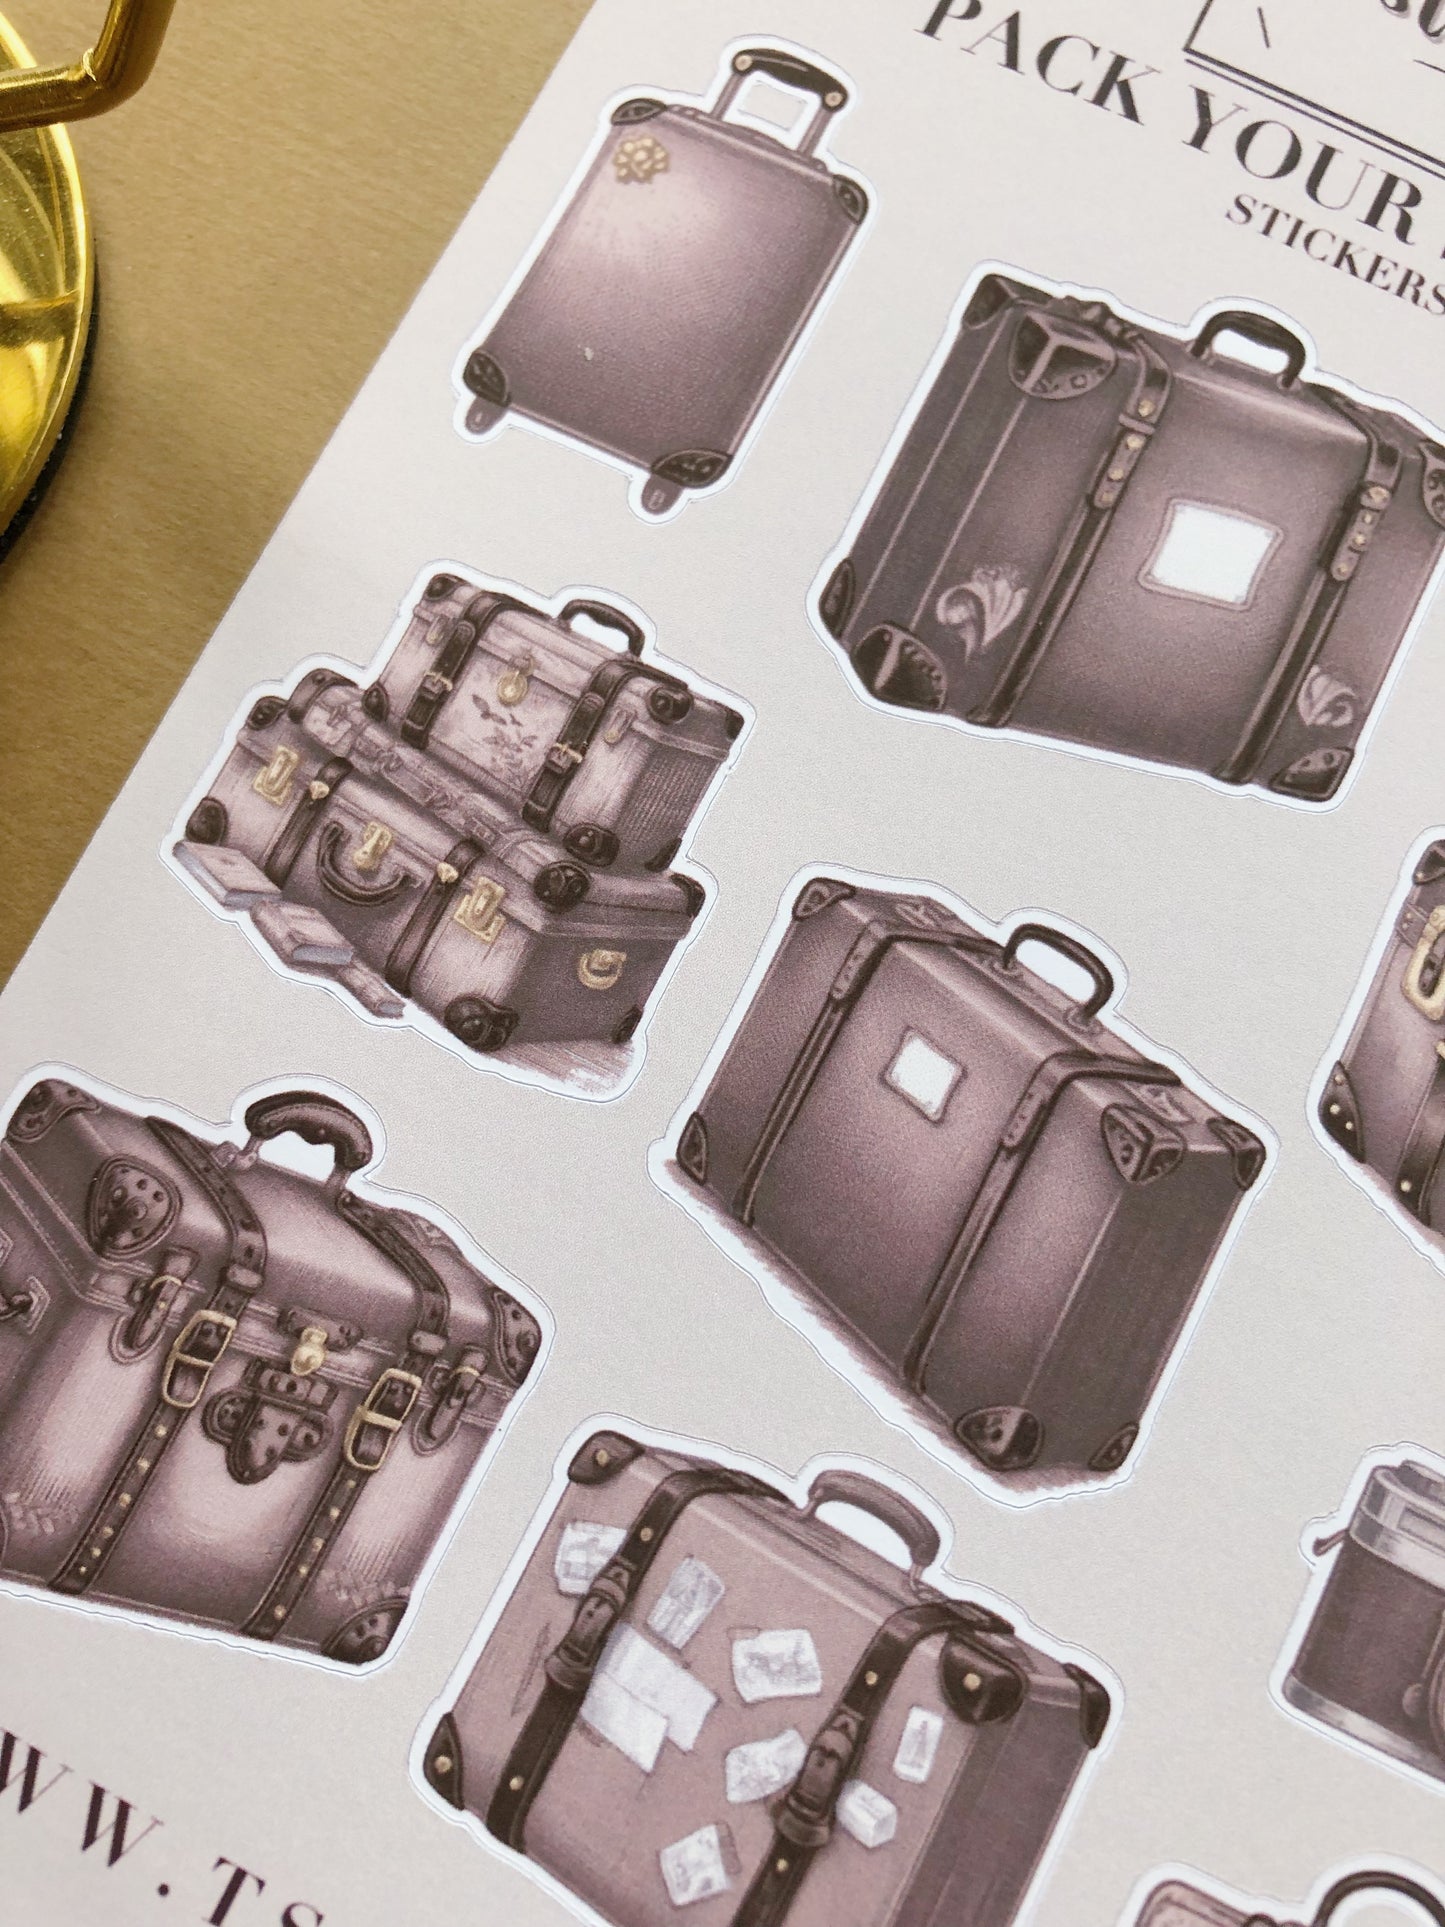 "Pack Your Suitcases" Sticker Sheet